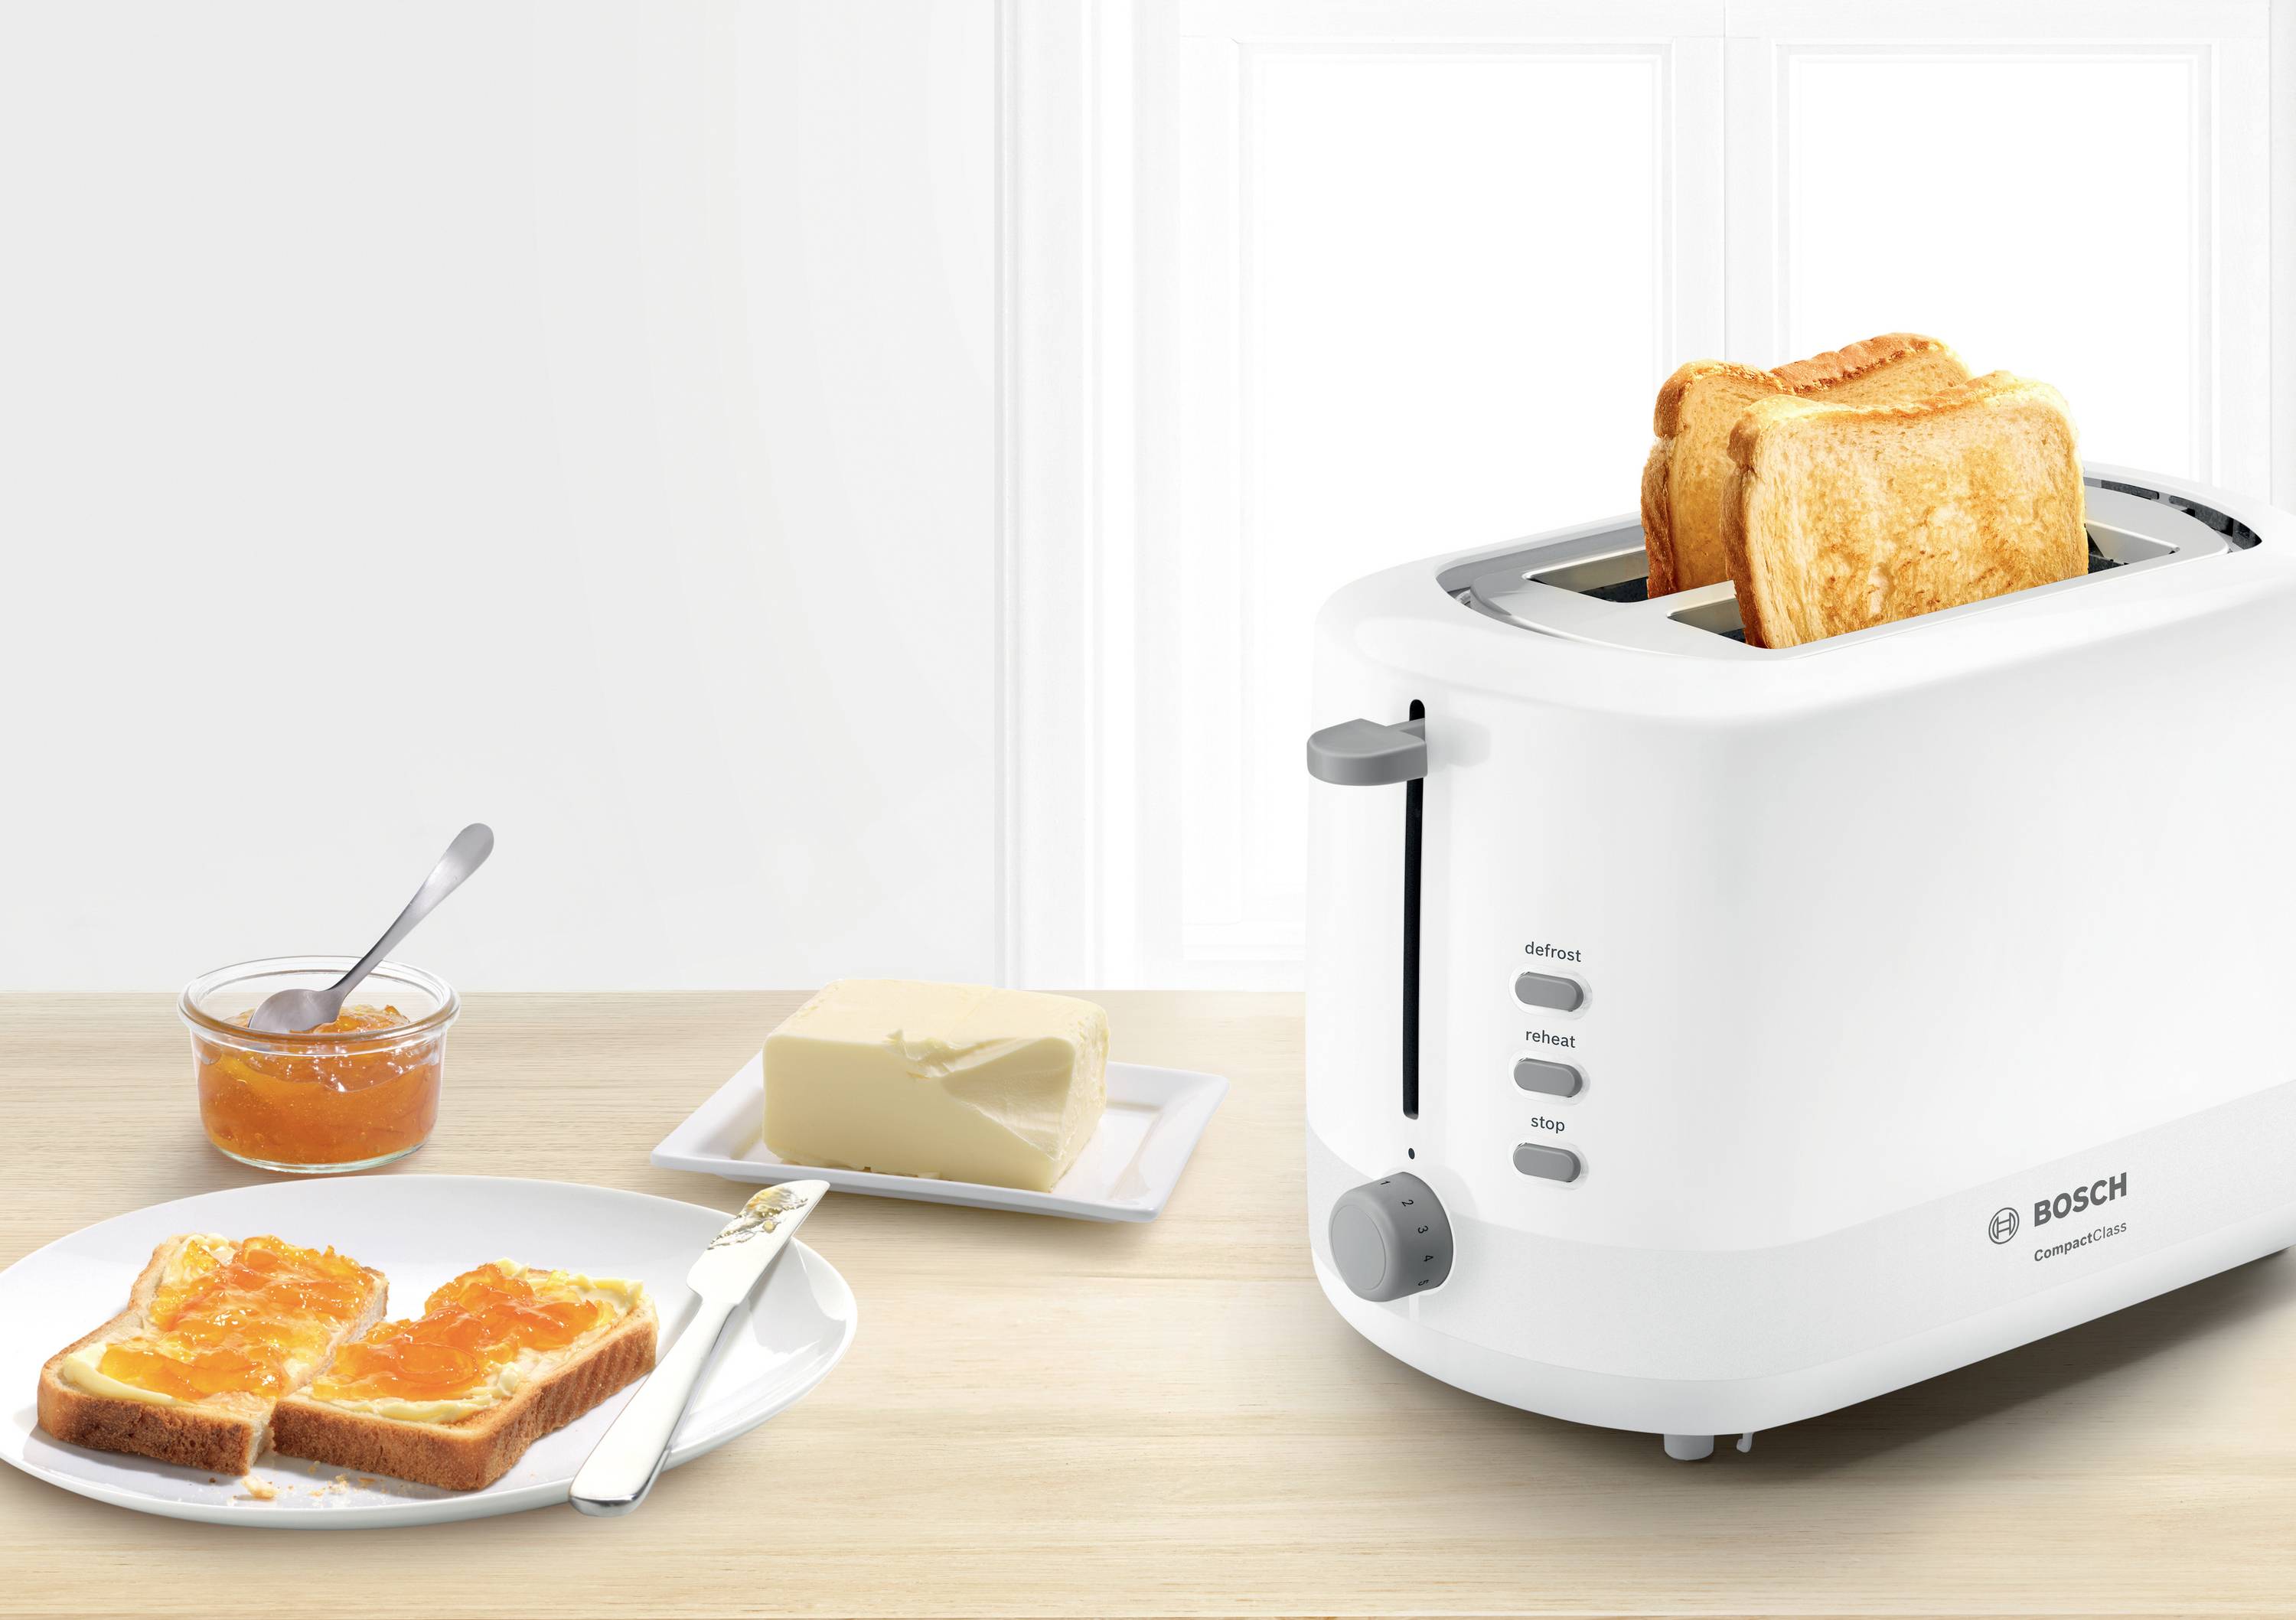 Bosch Haushalt TAT6A513 Toaster With Home Baking Attachment, 47% OFF